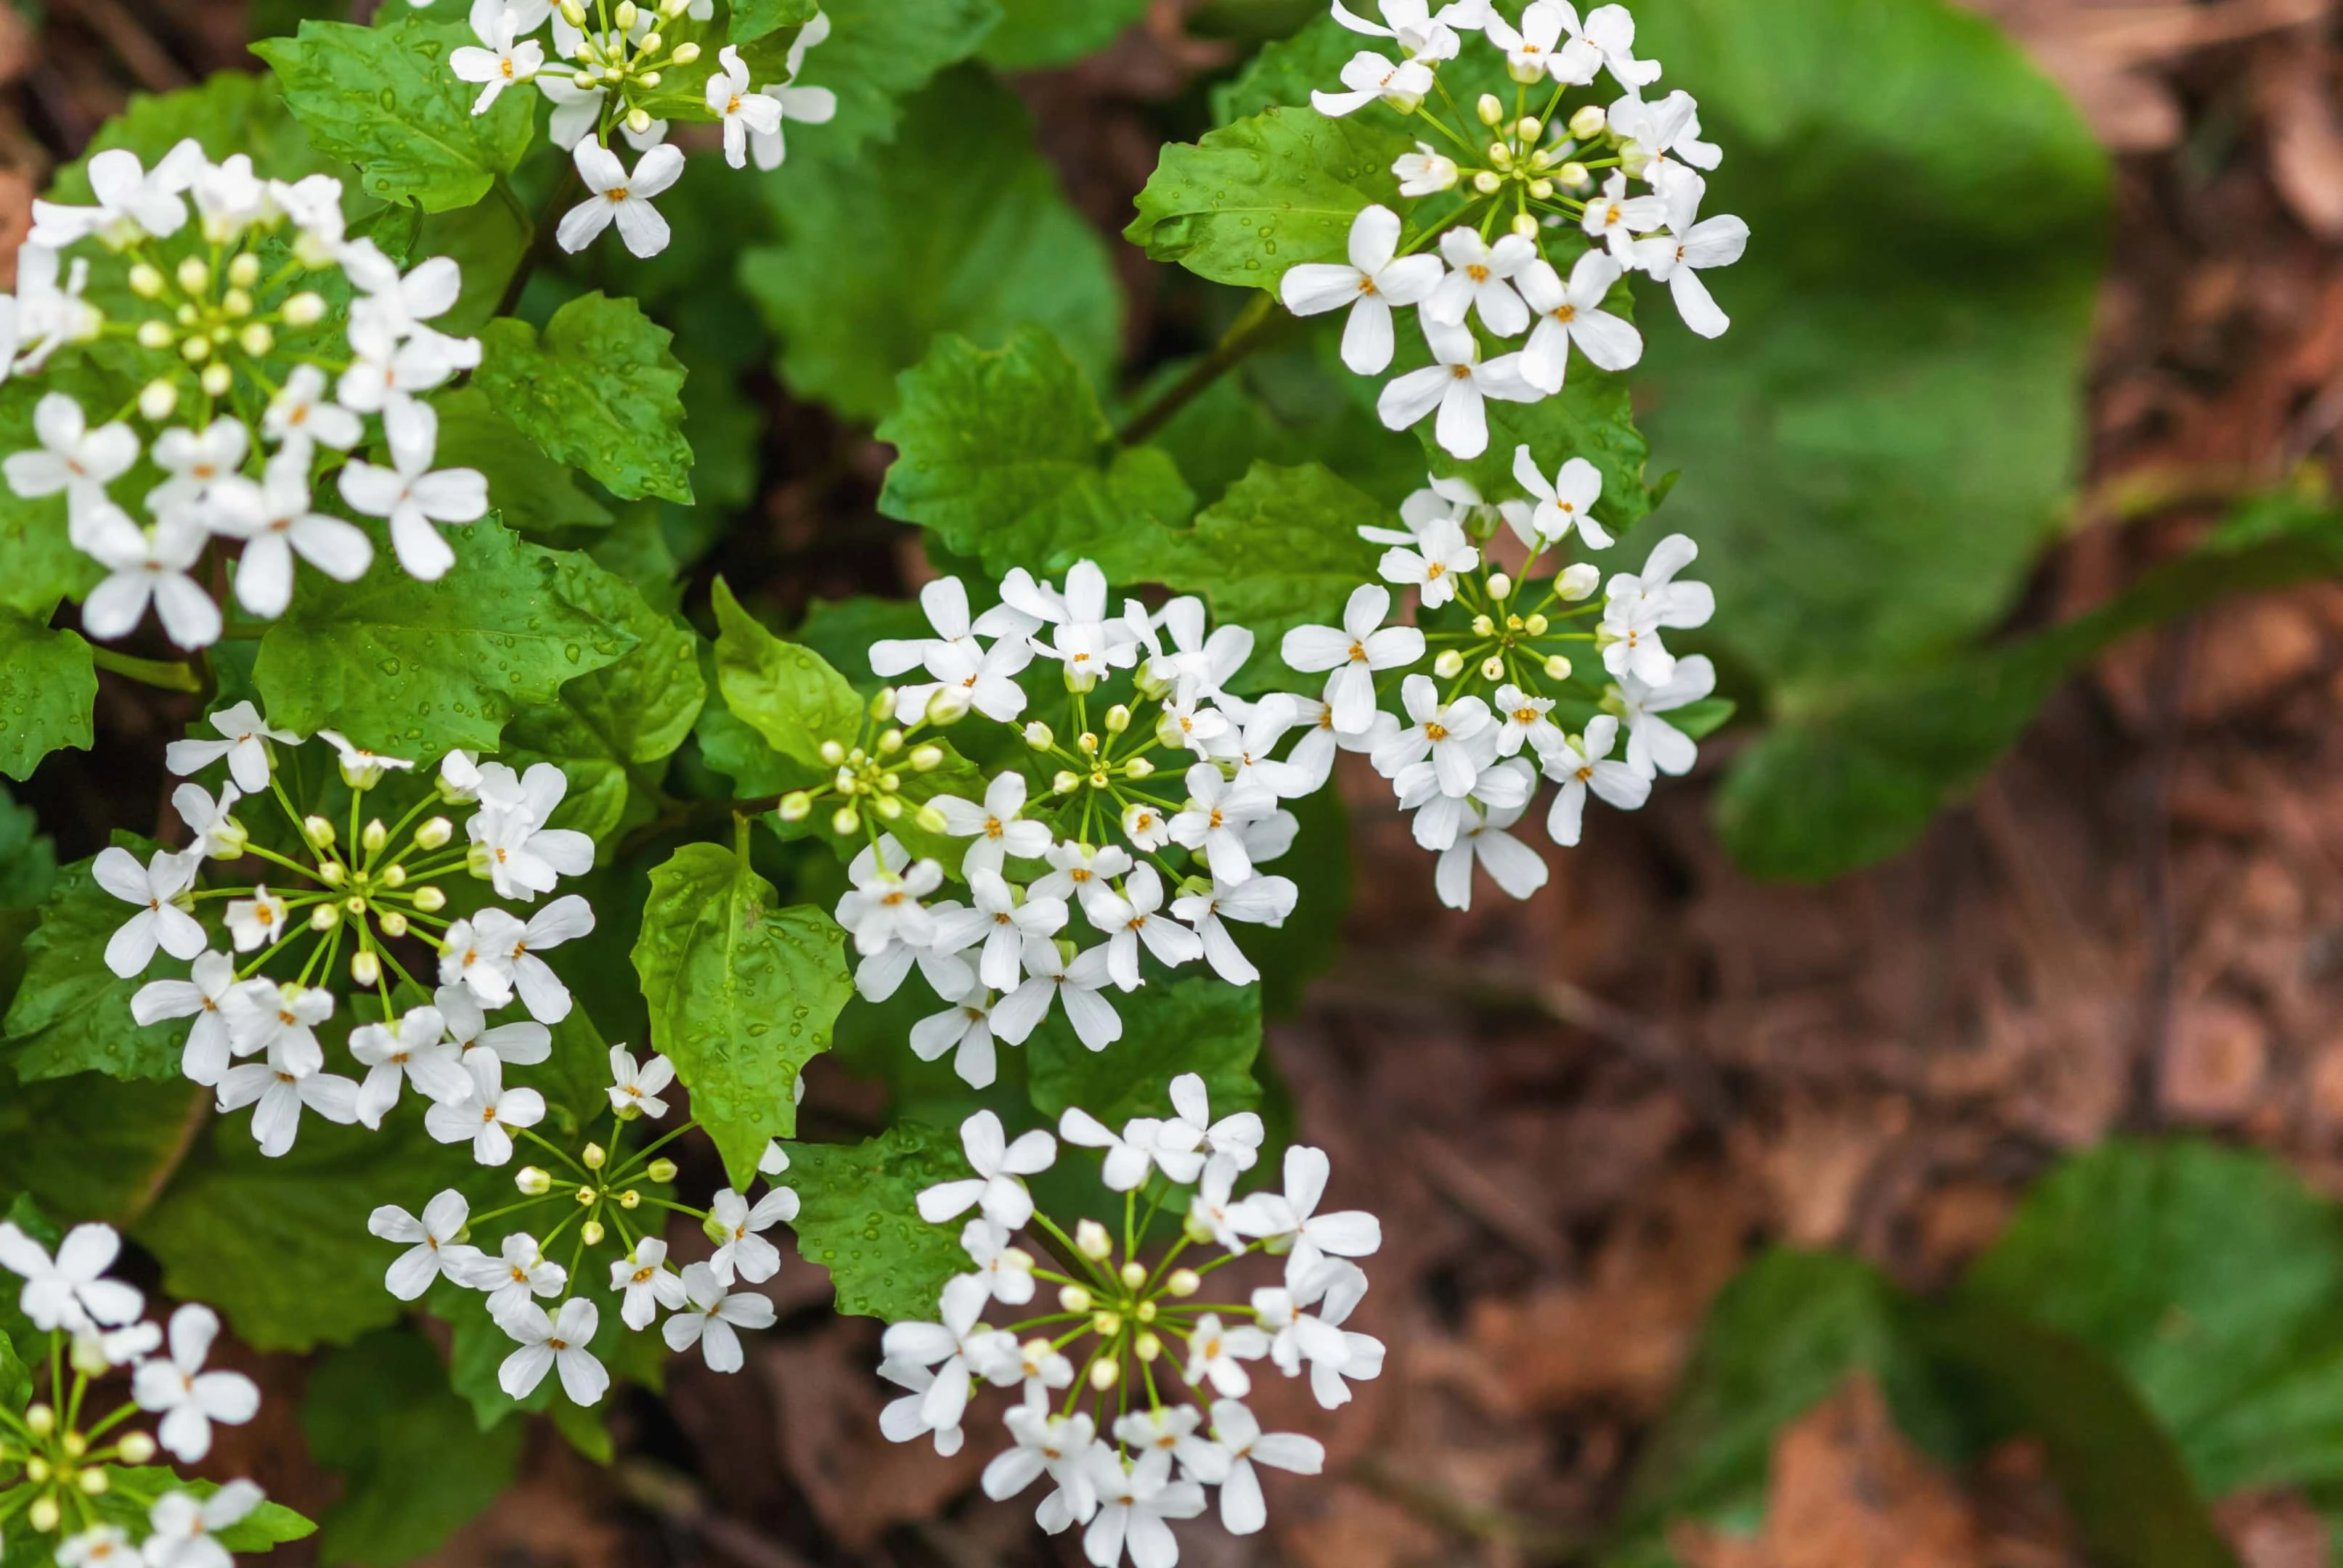 Mustard garlic white flowers — wild edible plant in the forest